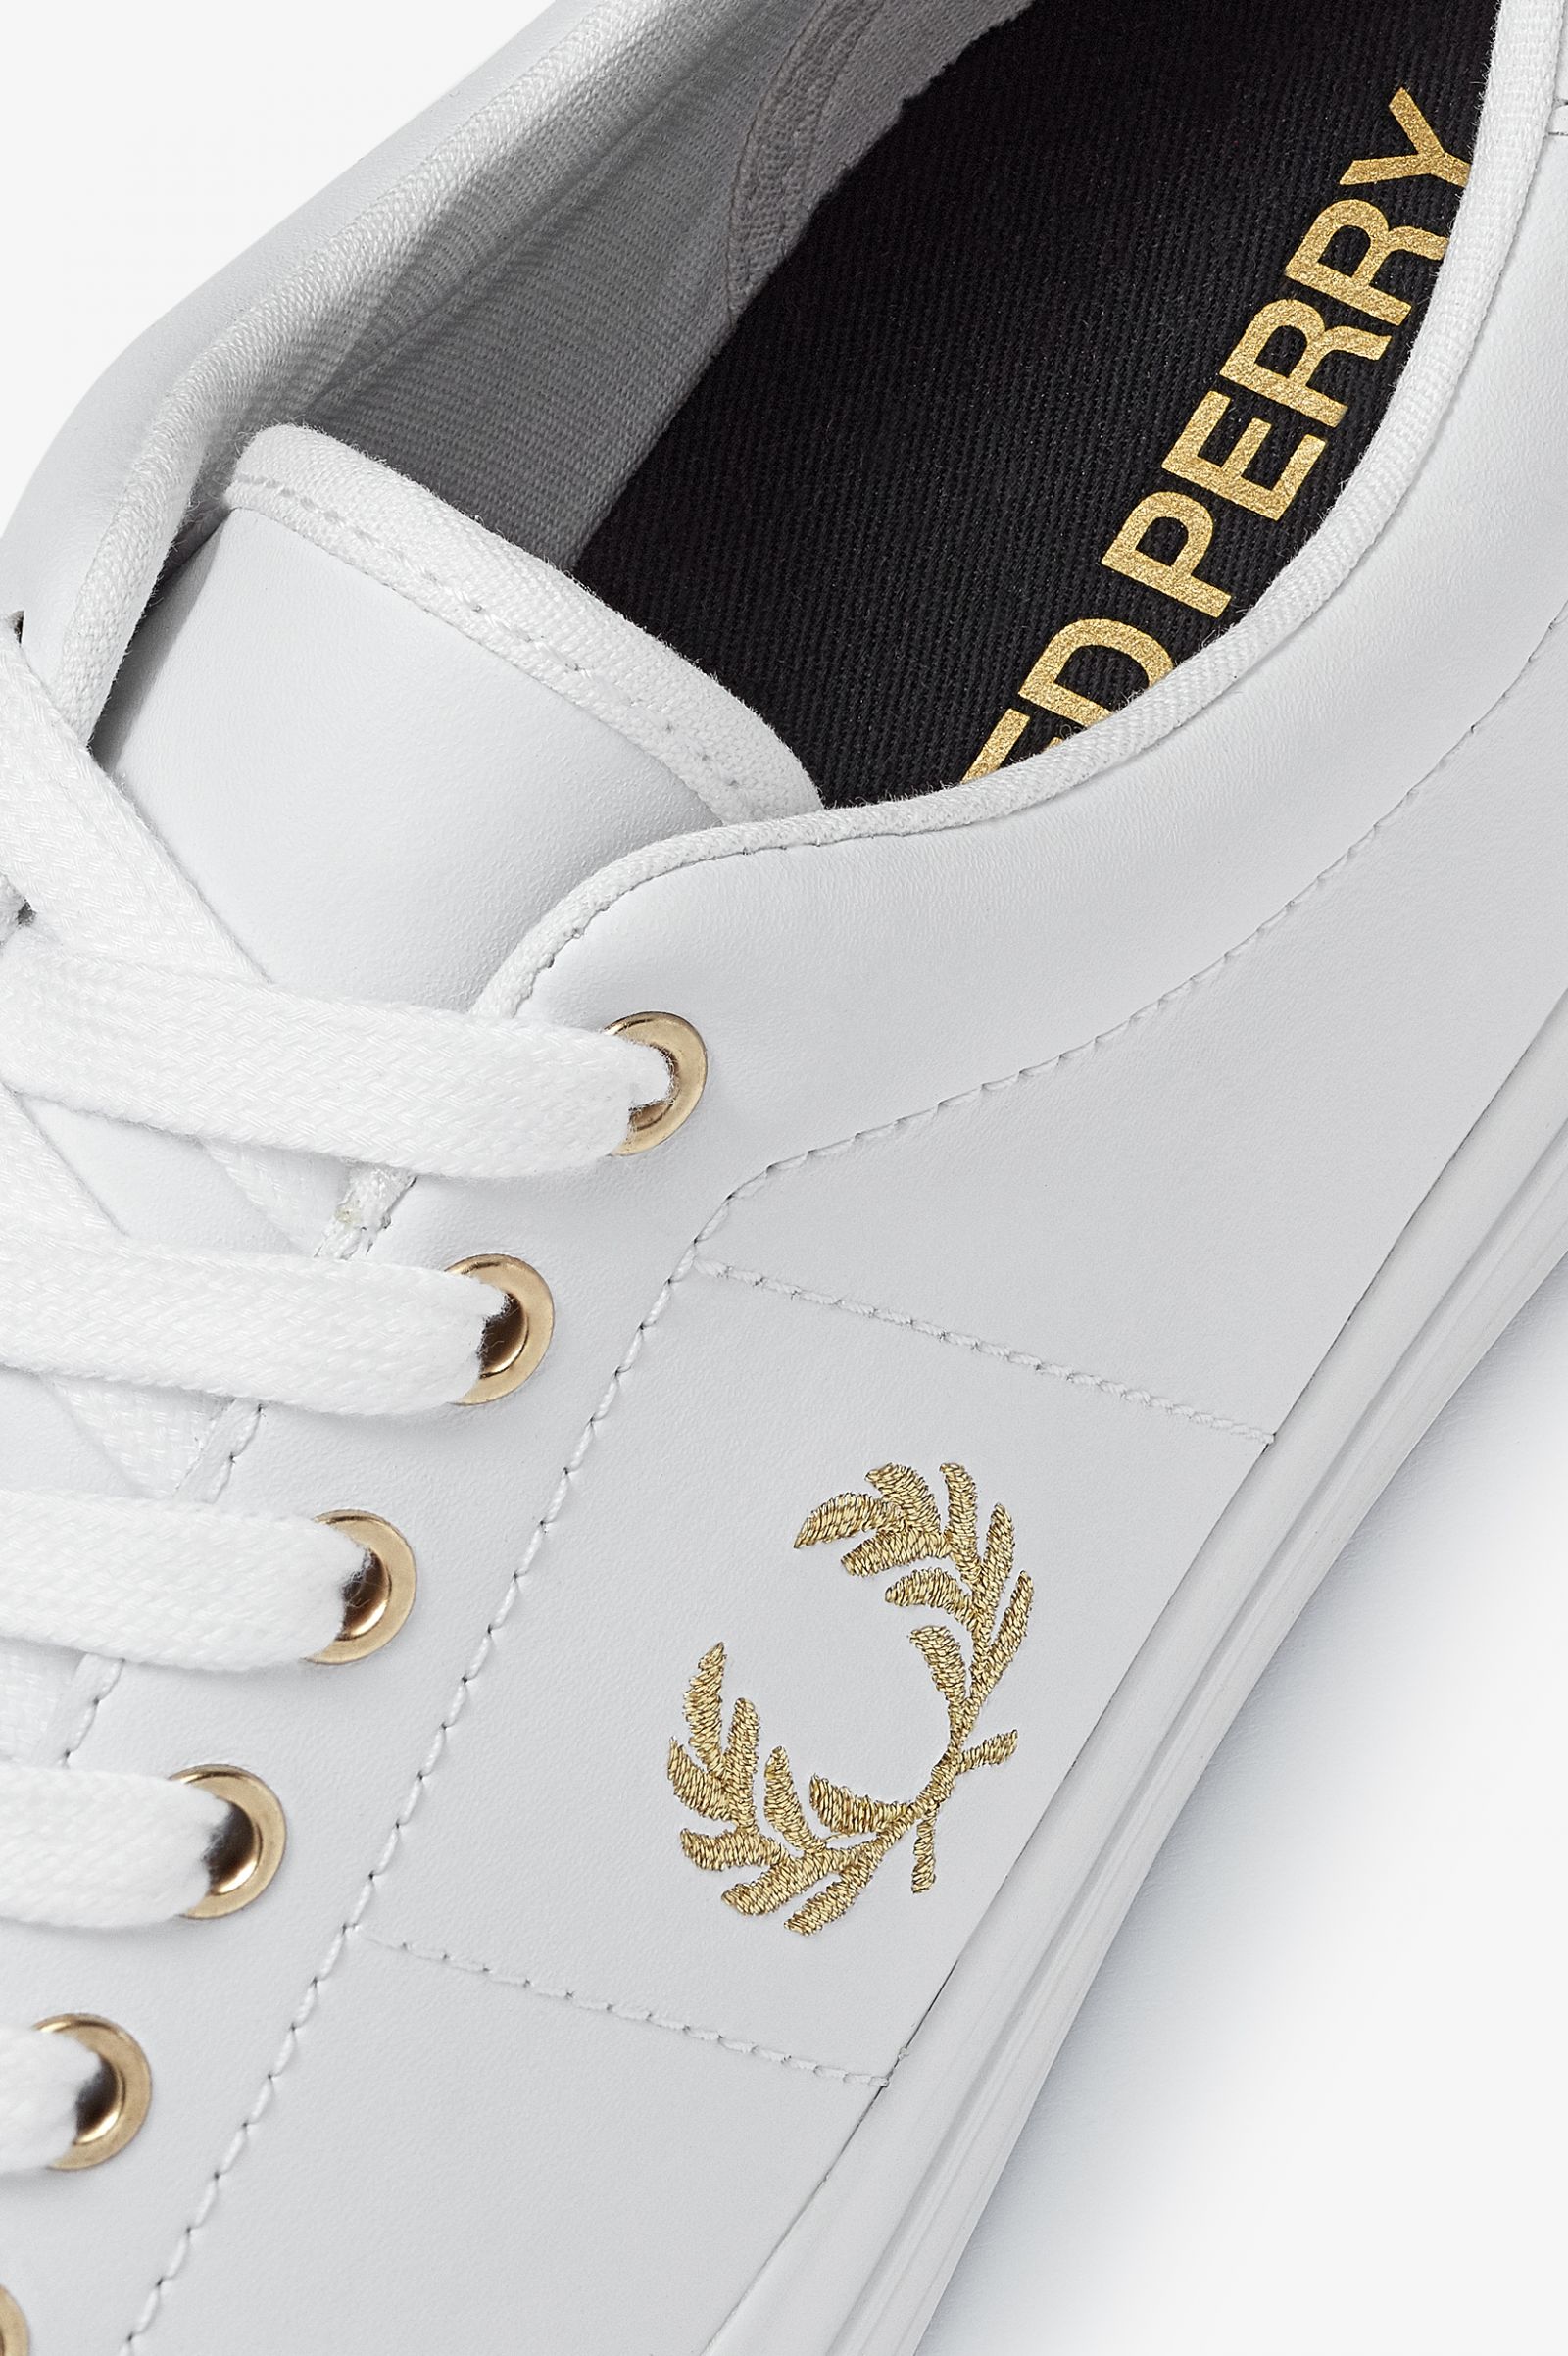 fred perry casual shoes